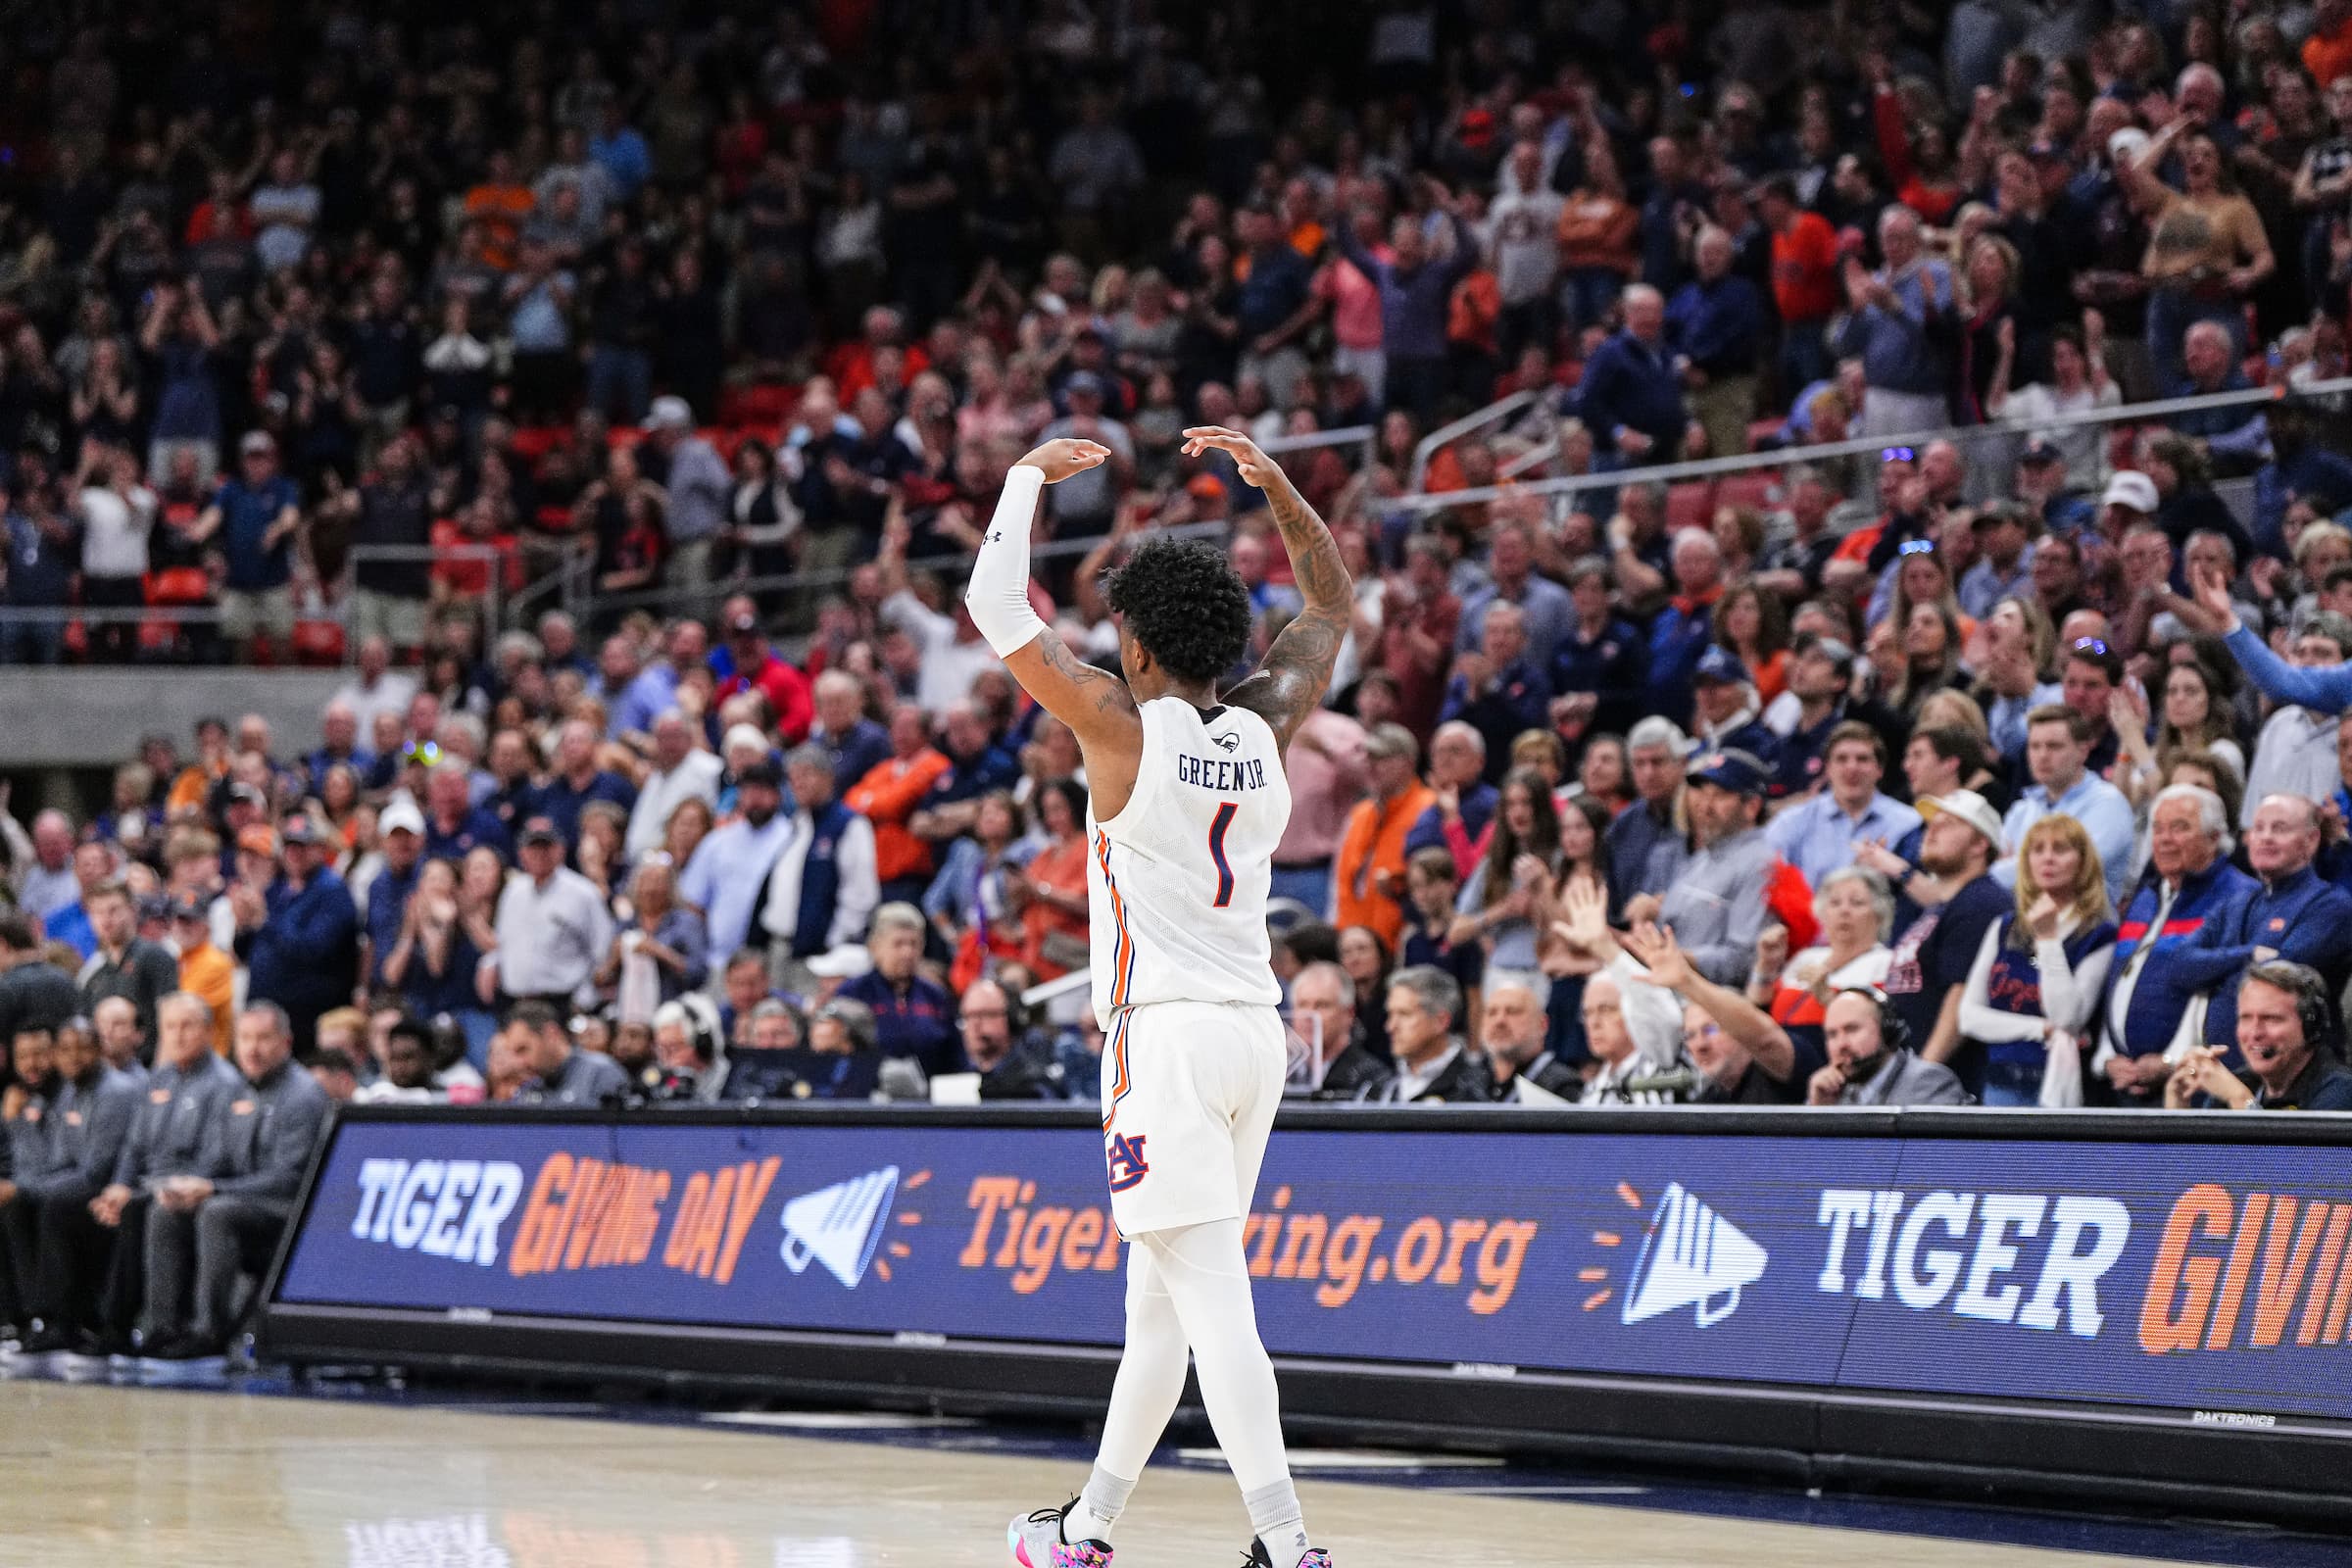 Wendell Green Jr. (1) during the game between the Tennessee Volunteers and the Auburn Tigers at Neville Arena in Auburn, AL on Saturday, Mar 4, 2023. Zach Bland/Auburn Tigers